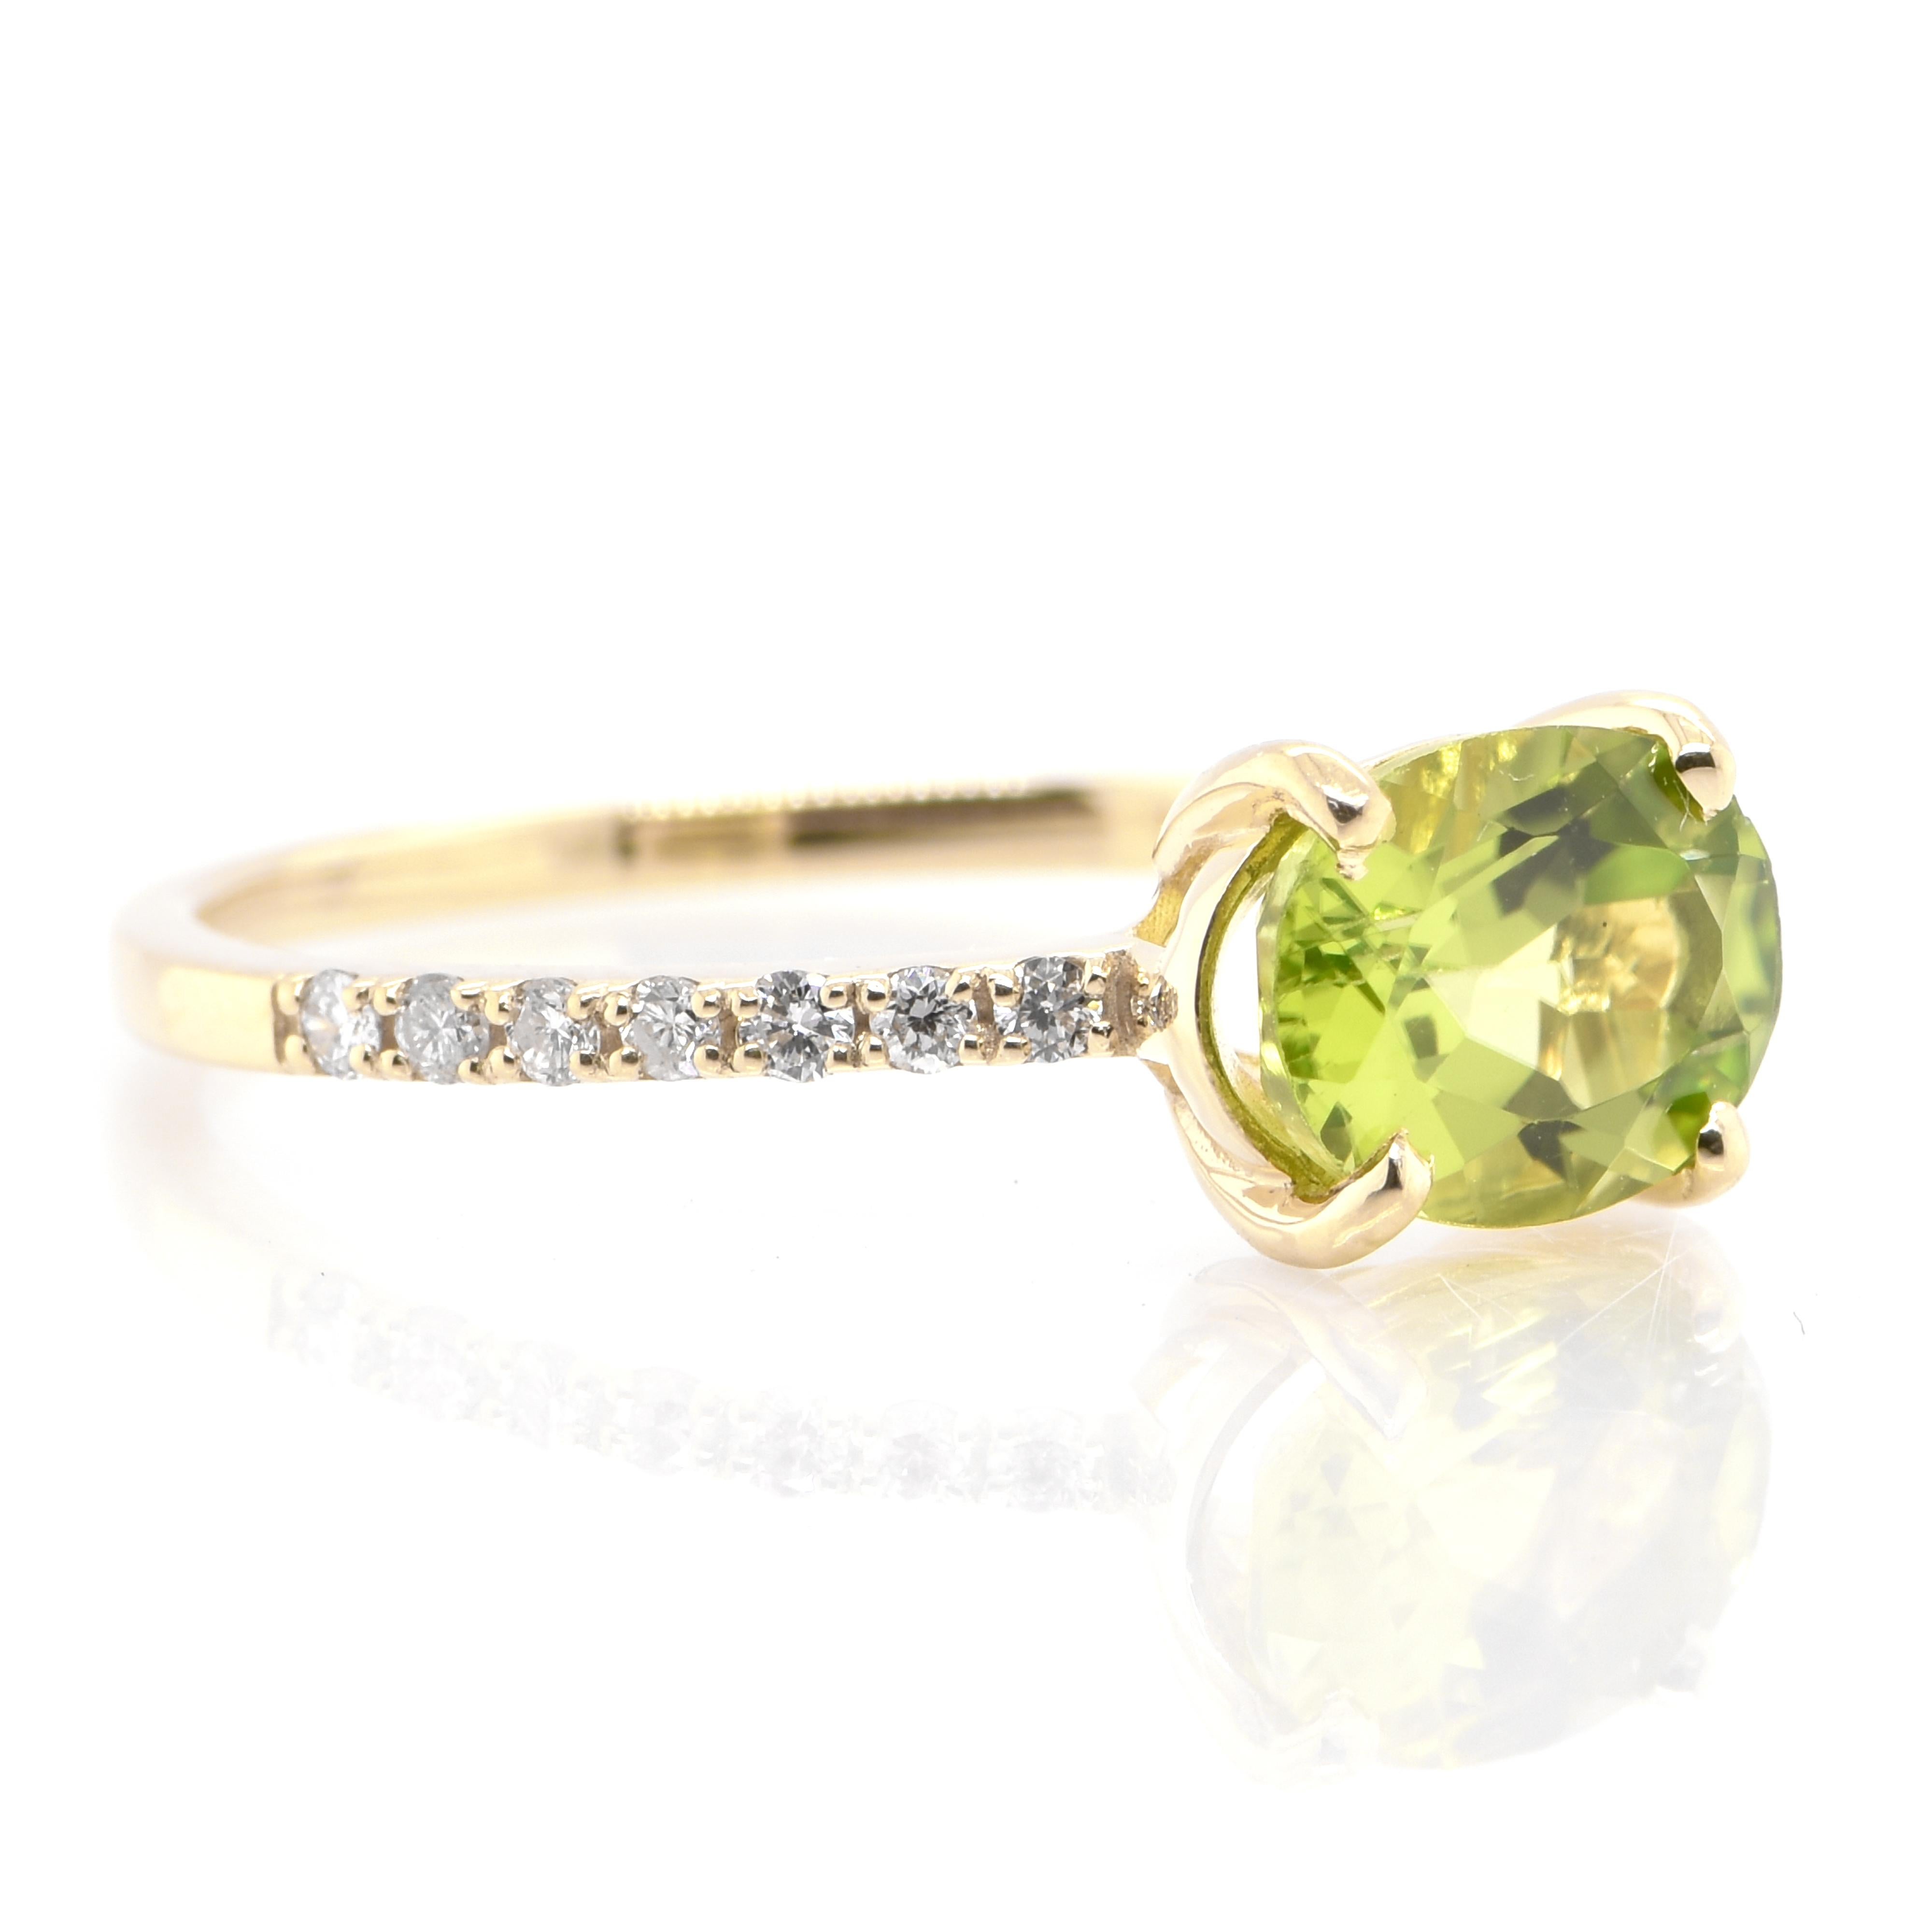 A beautiful Engagement Ring featuring a 1.46 Carat, Natural Peridot and 0.14 Carats of Diamond Accents set in 18 Karat Yellow Gold. From the earliest times, people confused Peridot with other gems such as Emerald and Topaz. Some historians believe